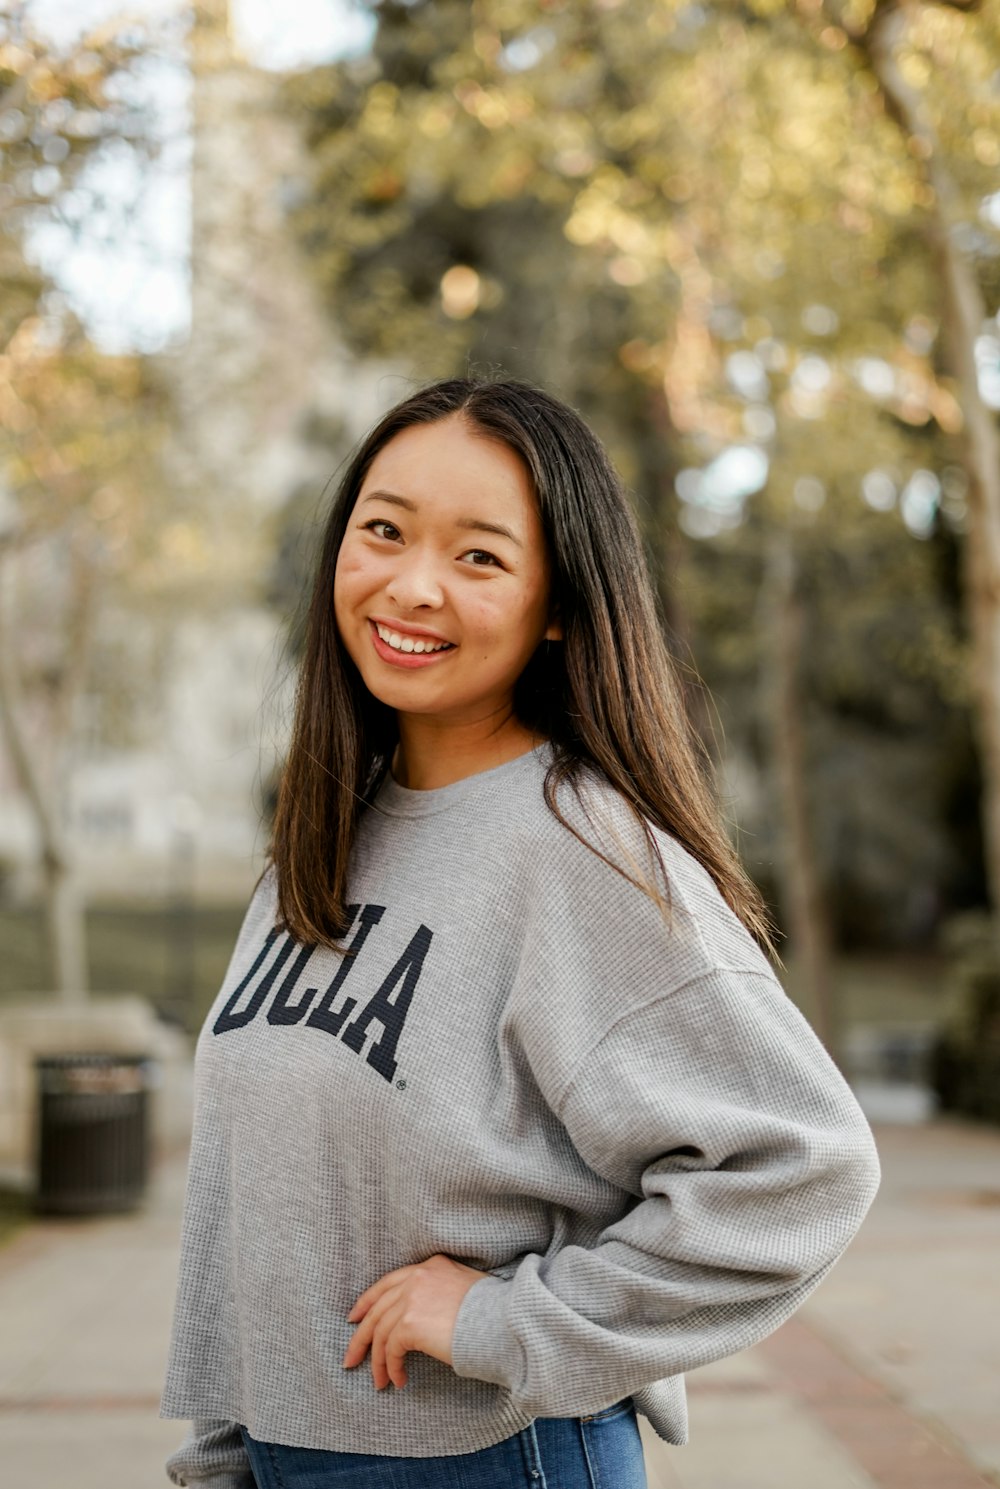 woman in gray and black crew neck sweater smiling